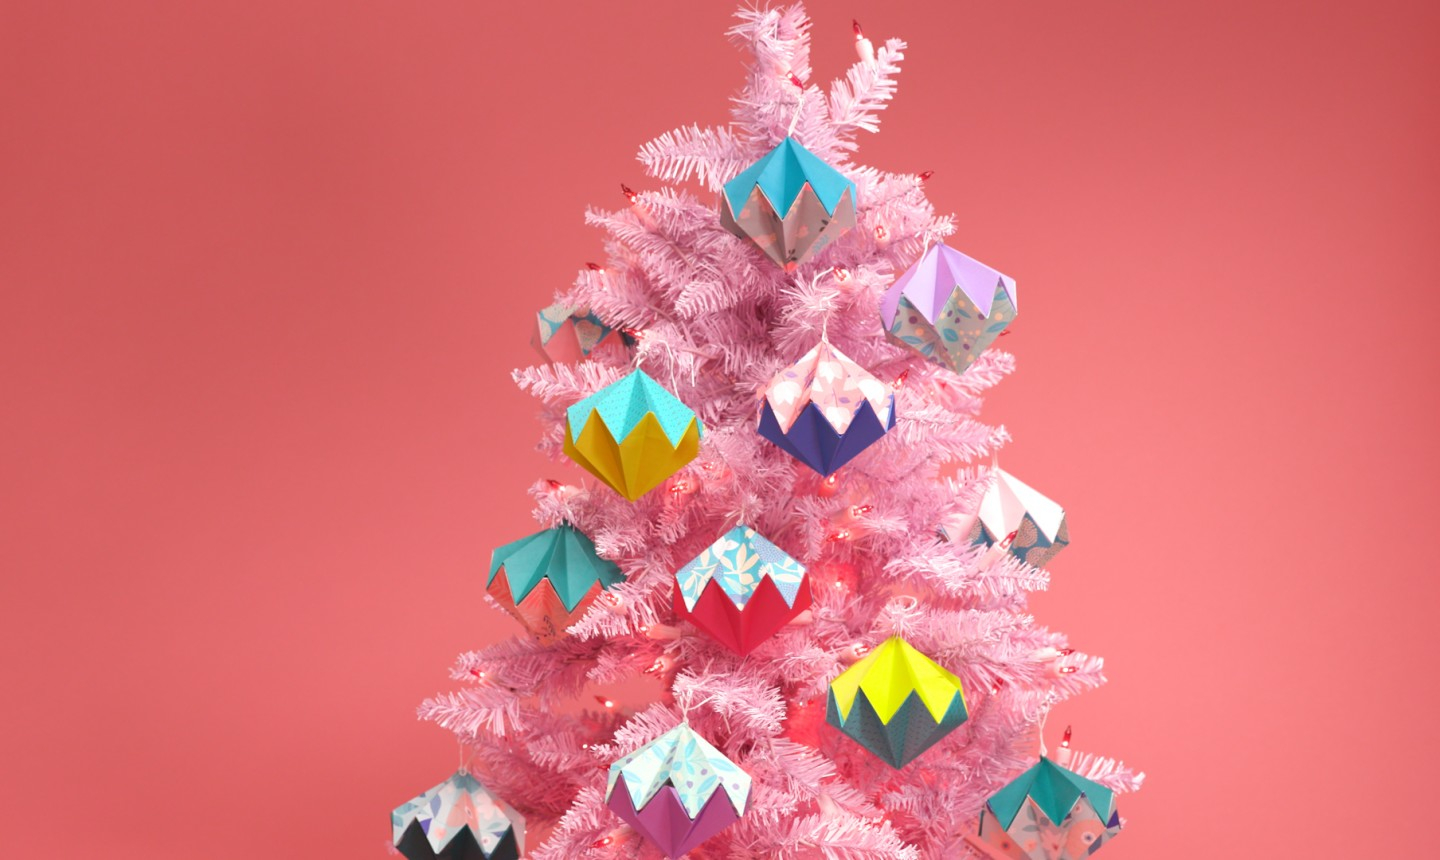 Origami Crane Ornament Christmas These Diy Origami Ornaments Are Just So Cool